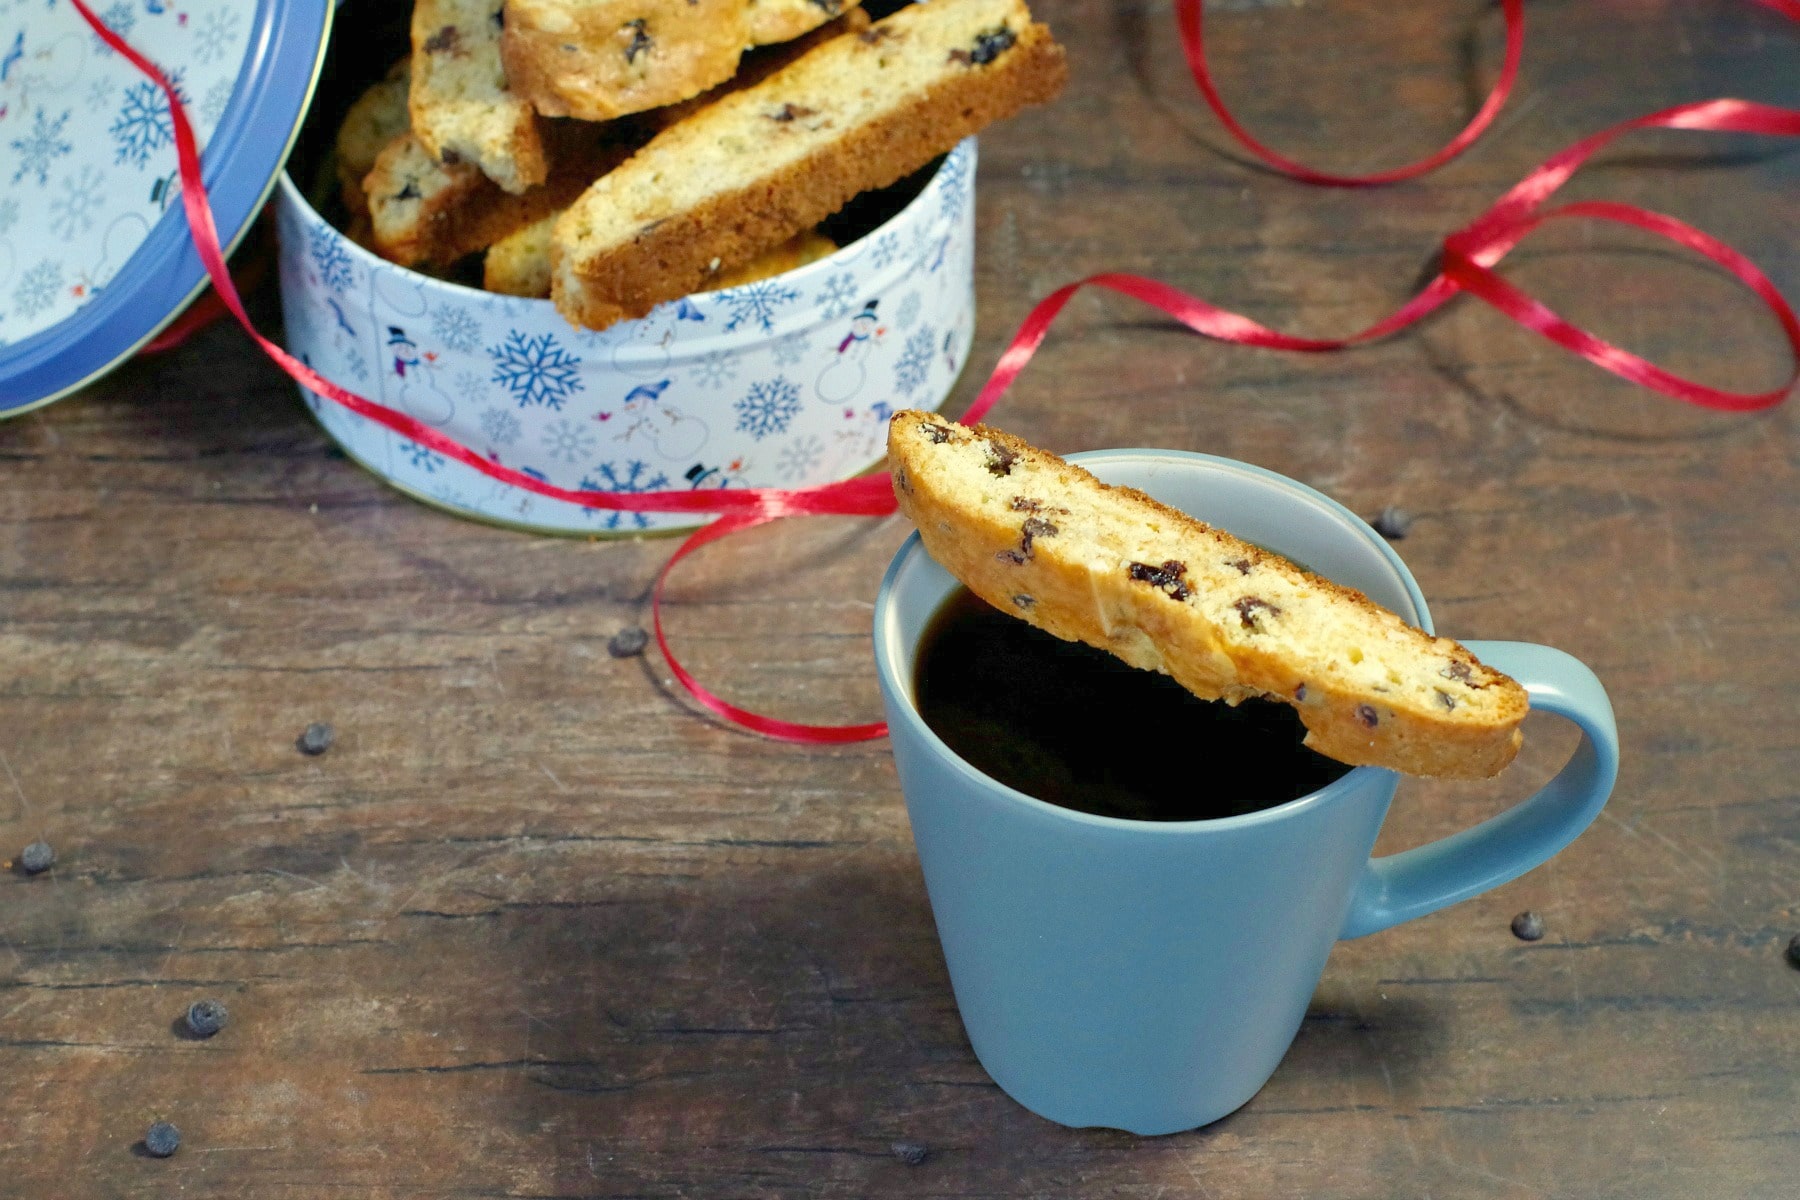 Black forest biscotti on a blue mug with Christmas tin of more biscotti in background